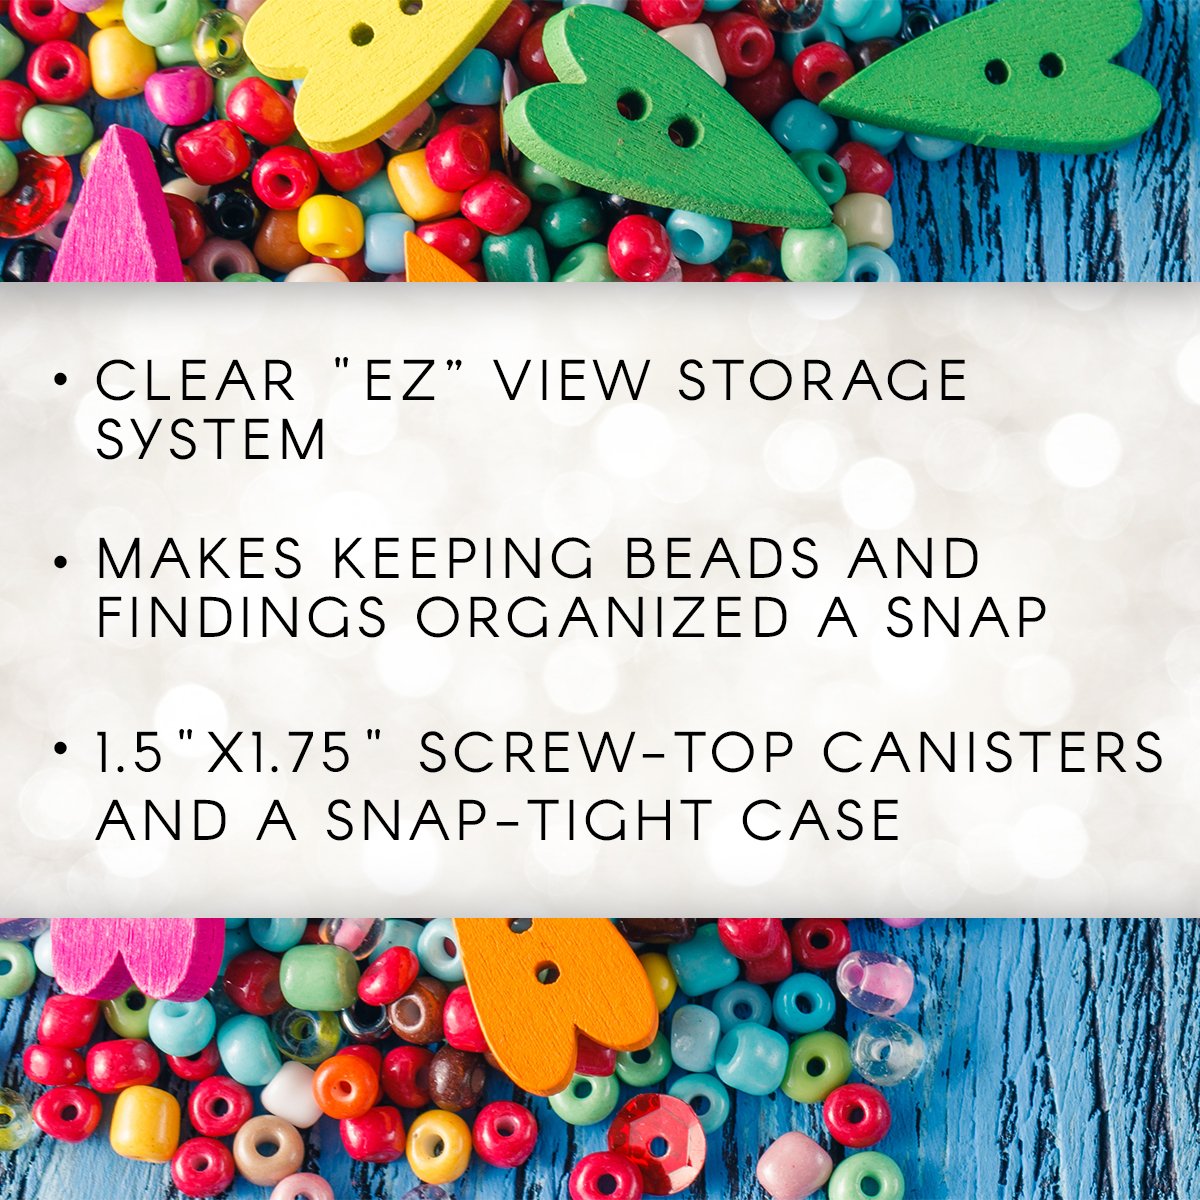 Darice Clear Bead Organizer Storage Case, Clear Bead Holder with 12 Small Containers, 6.25” x 4.75” x 2.08”